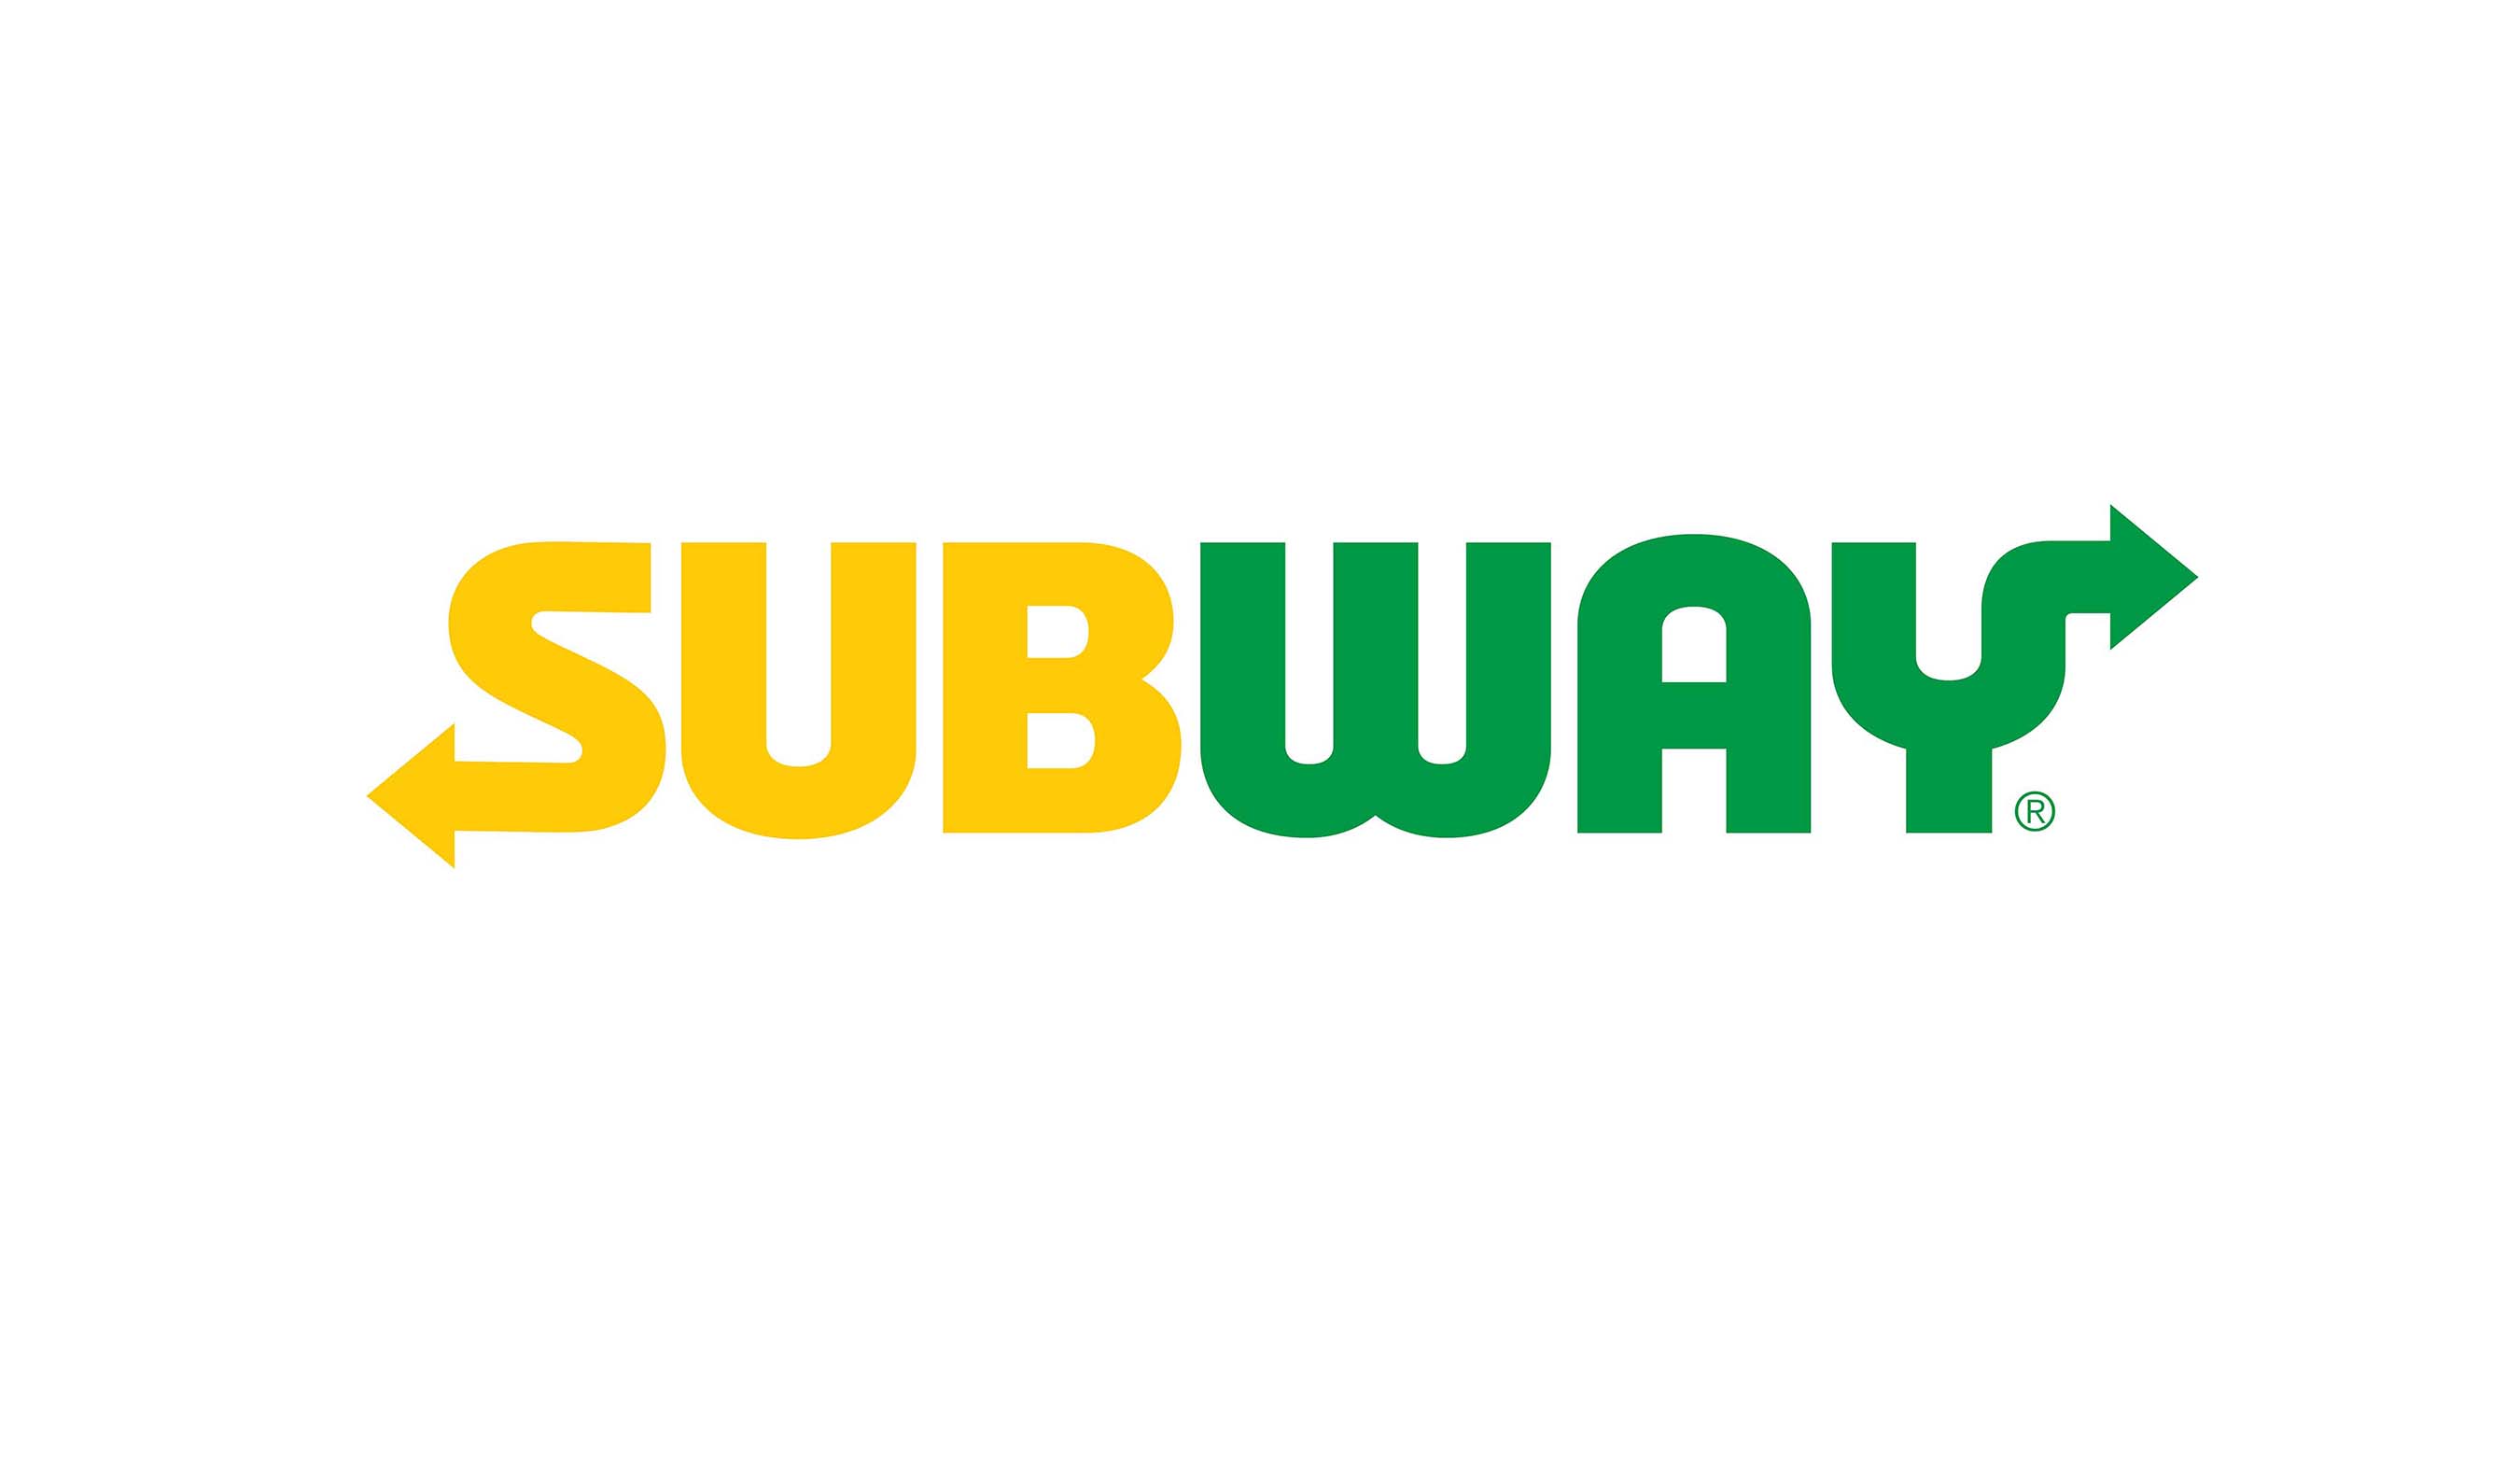 Fairfield Co.Subway Franchise for Sale -Earnings of $43,000 Owner/Operator